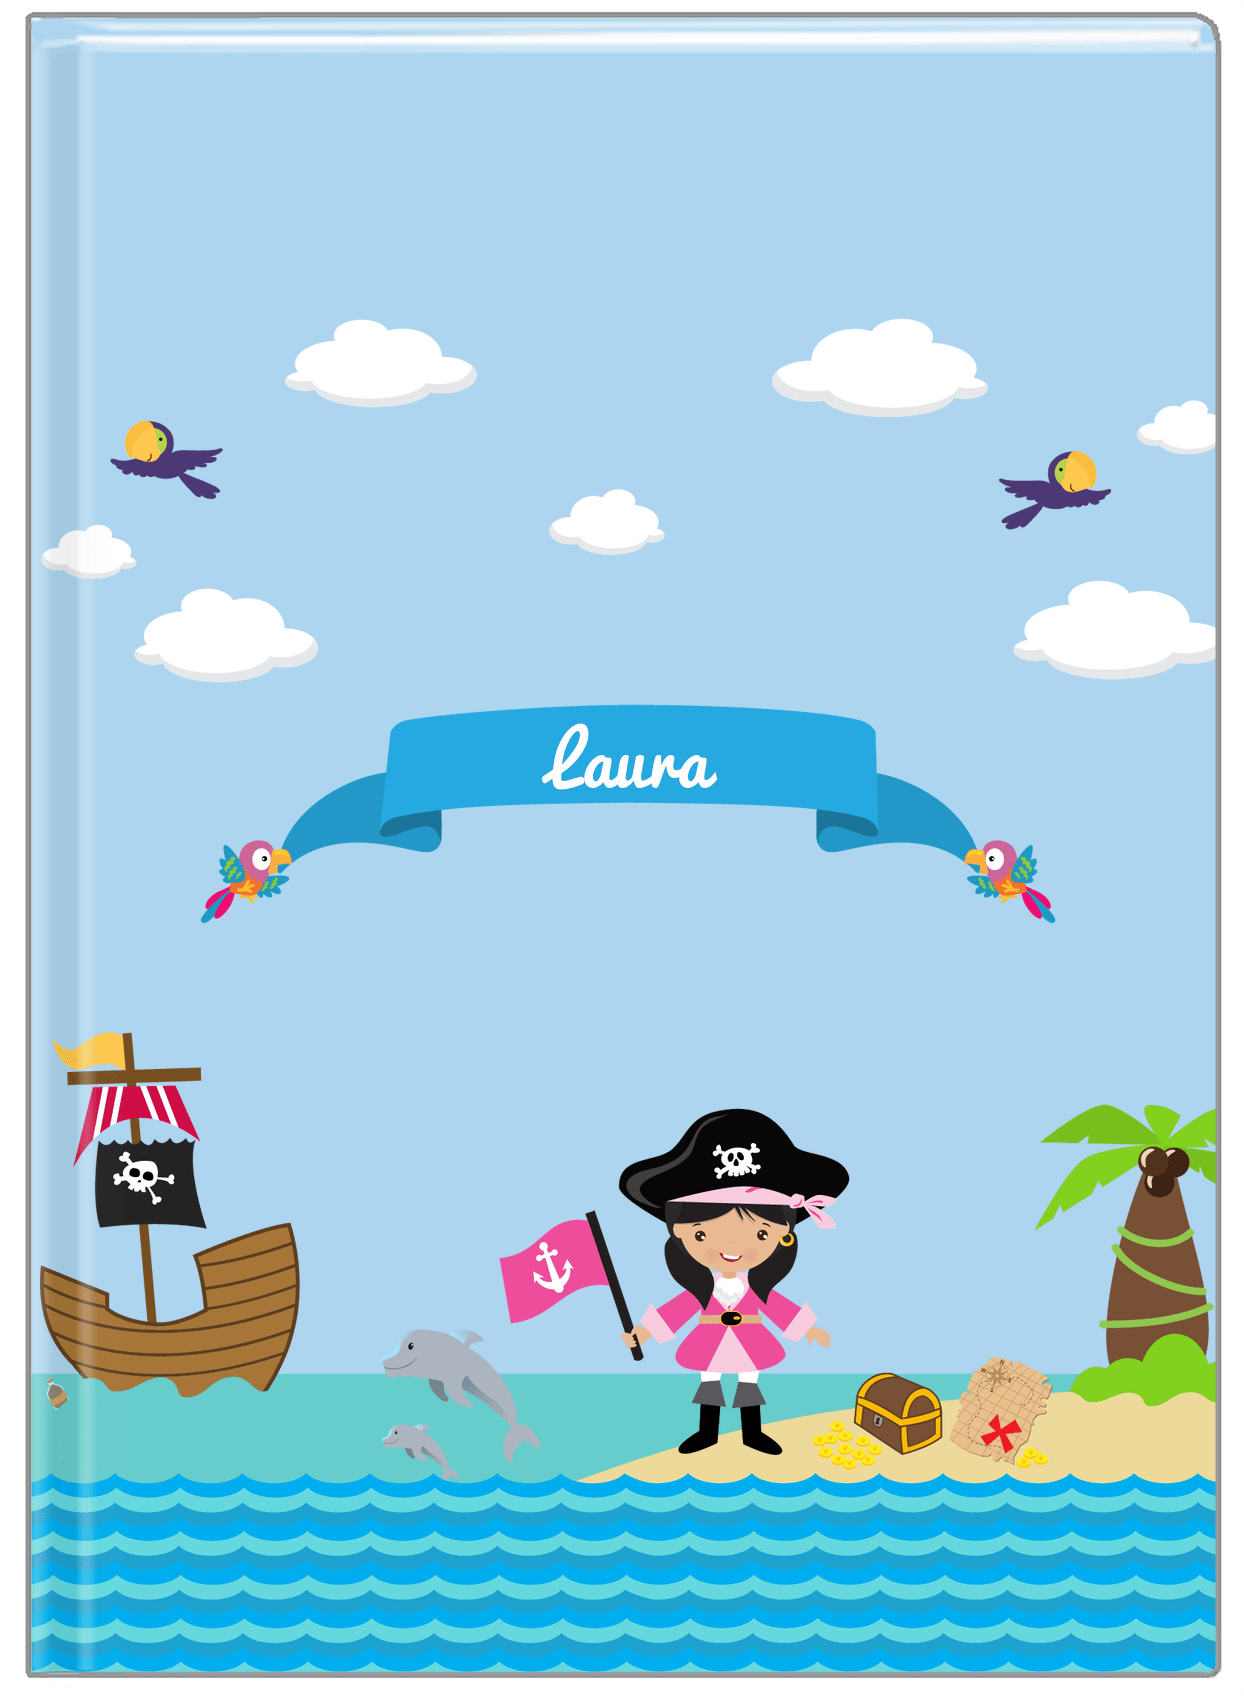 Personalized Pirate Journal I - Girl Pirate with Flag - Black Hair Girl - Front View